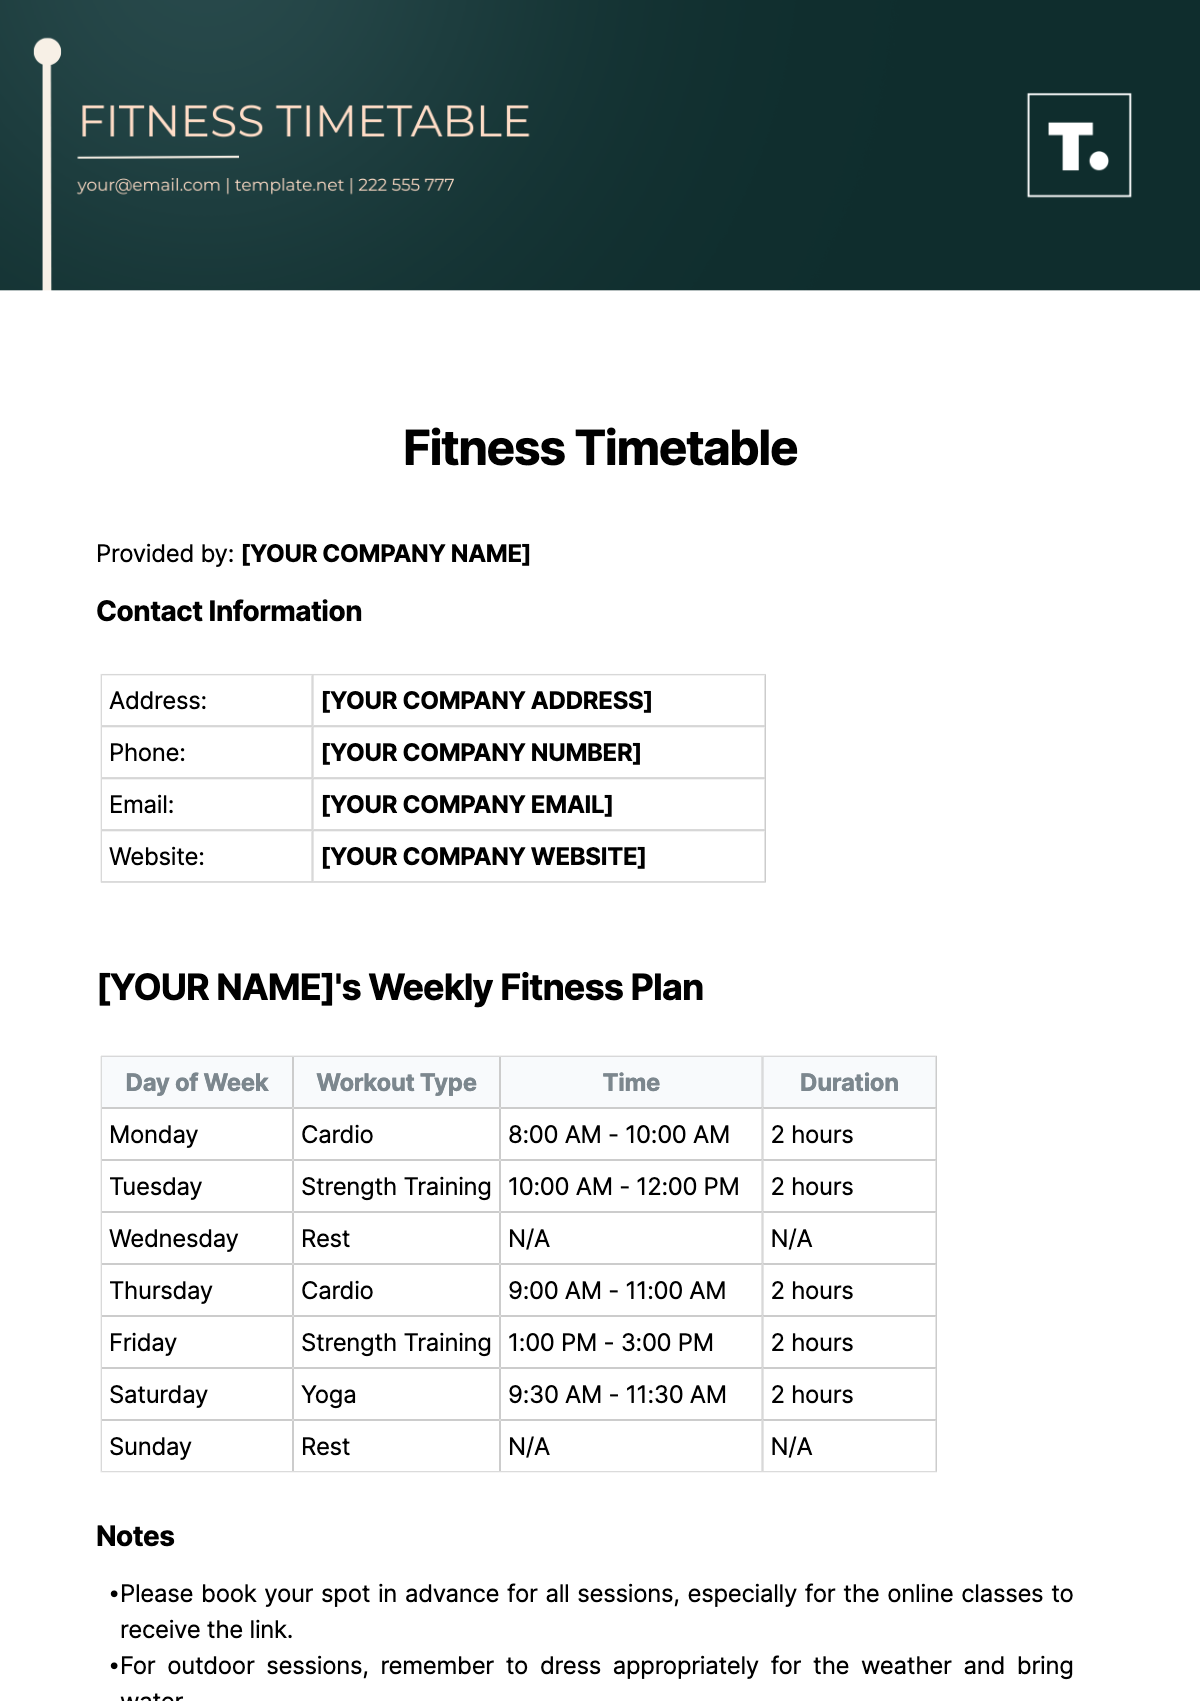 Free Fitness Timetable Template